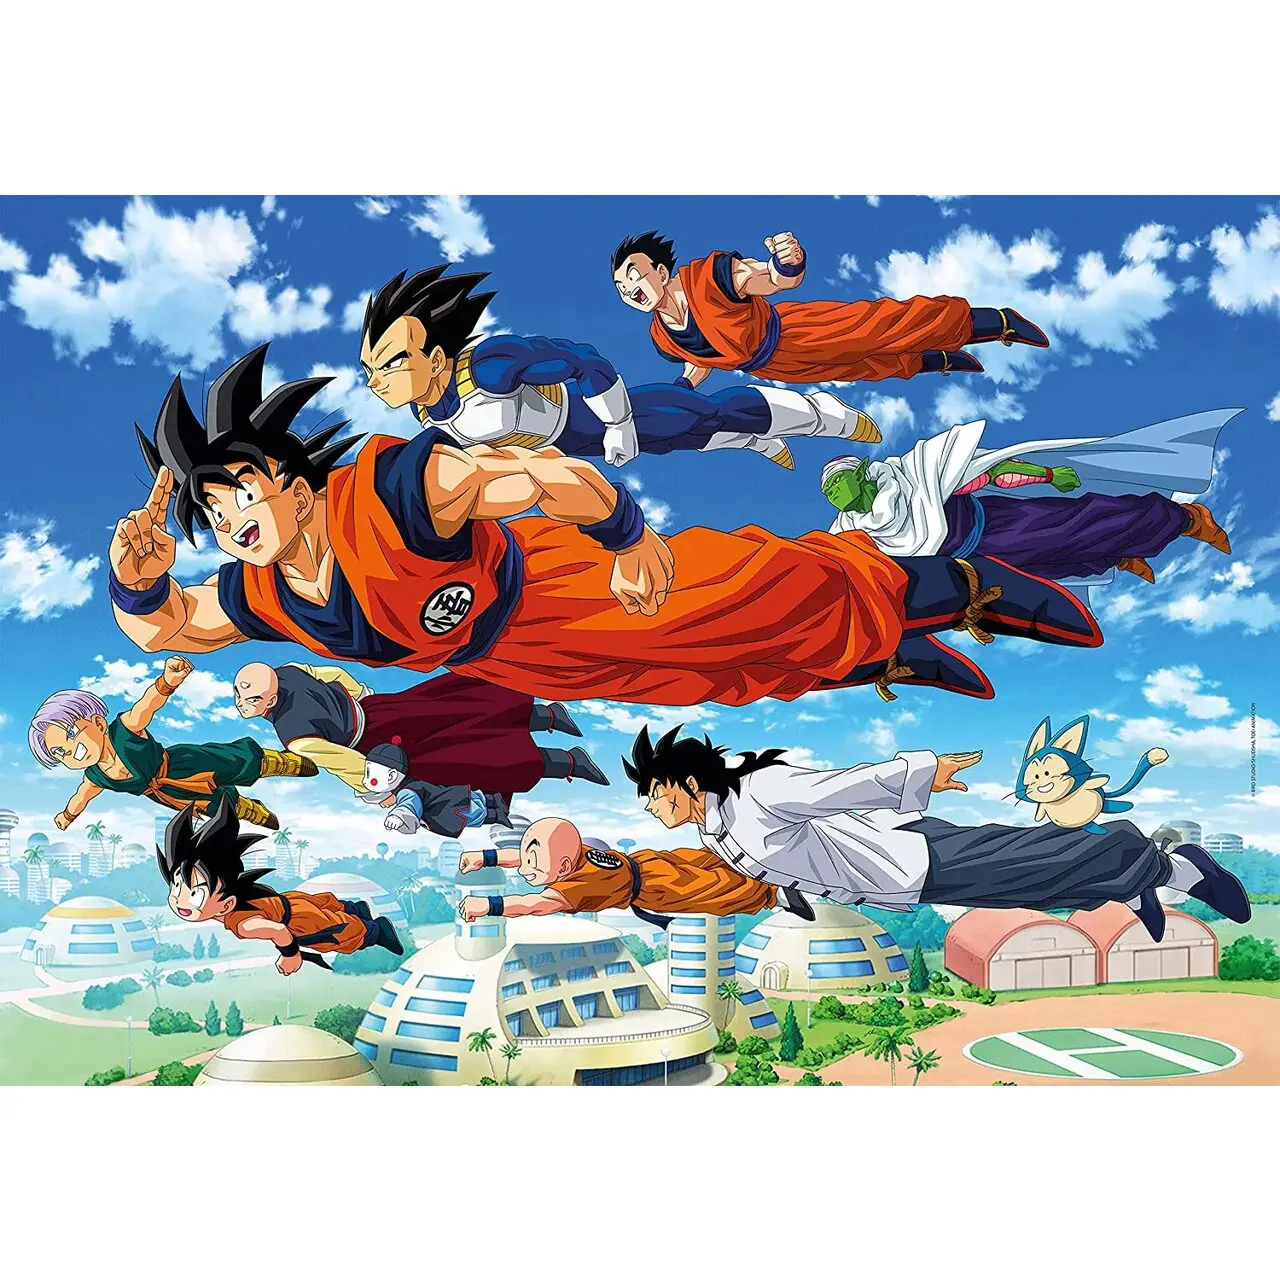 1000 Dragonball Teile Puzzle